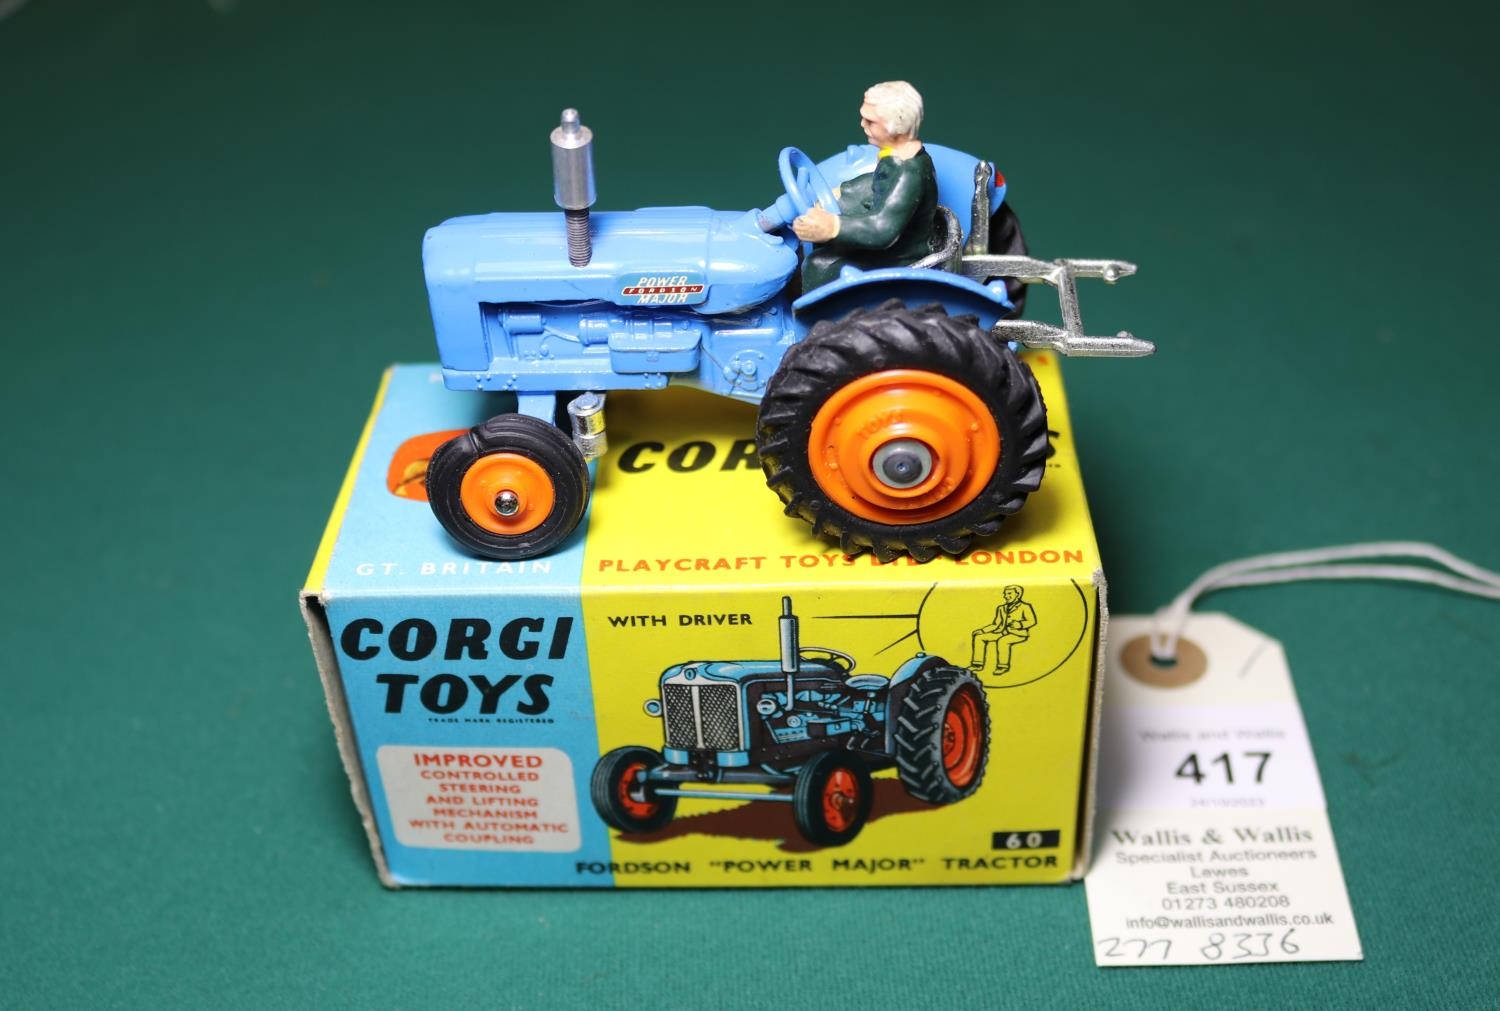 Corgi Toys Fordson Power Major Tractor (60). In mid blue with